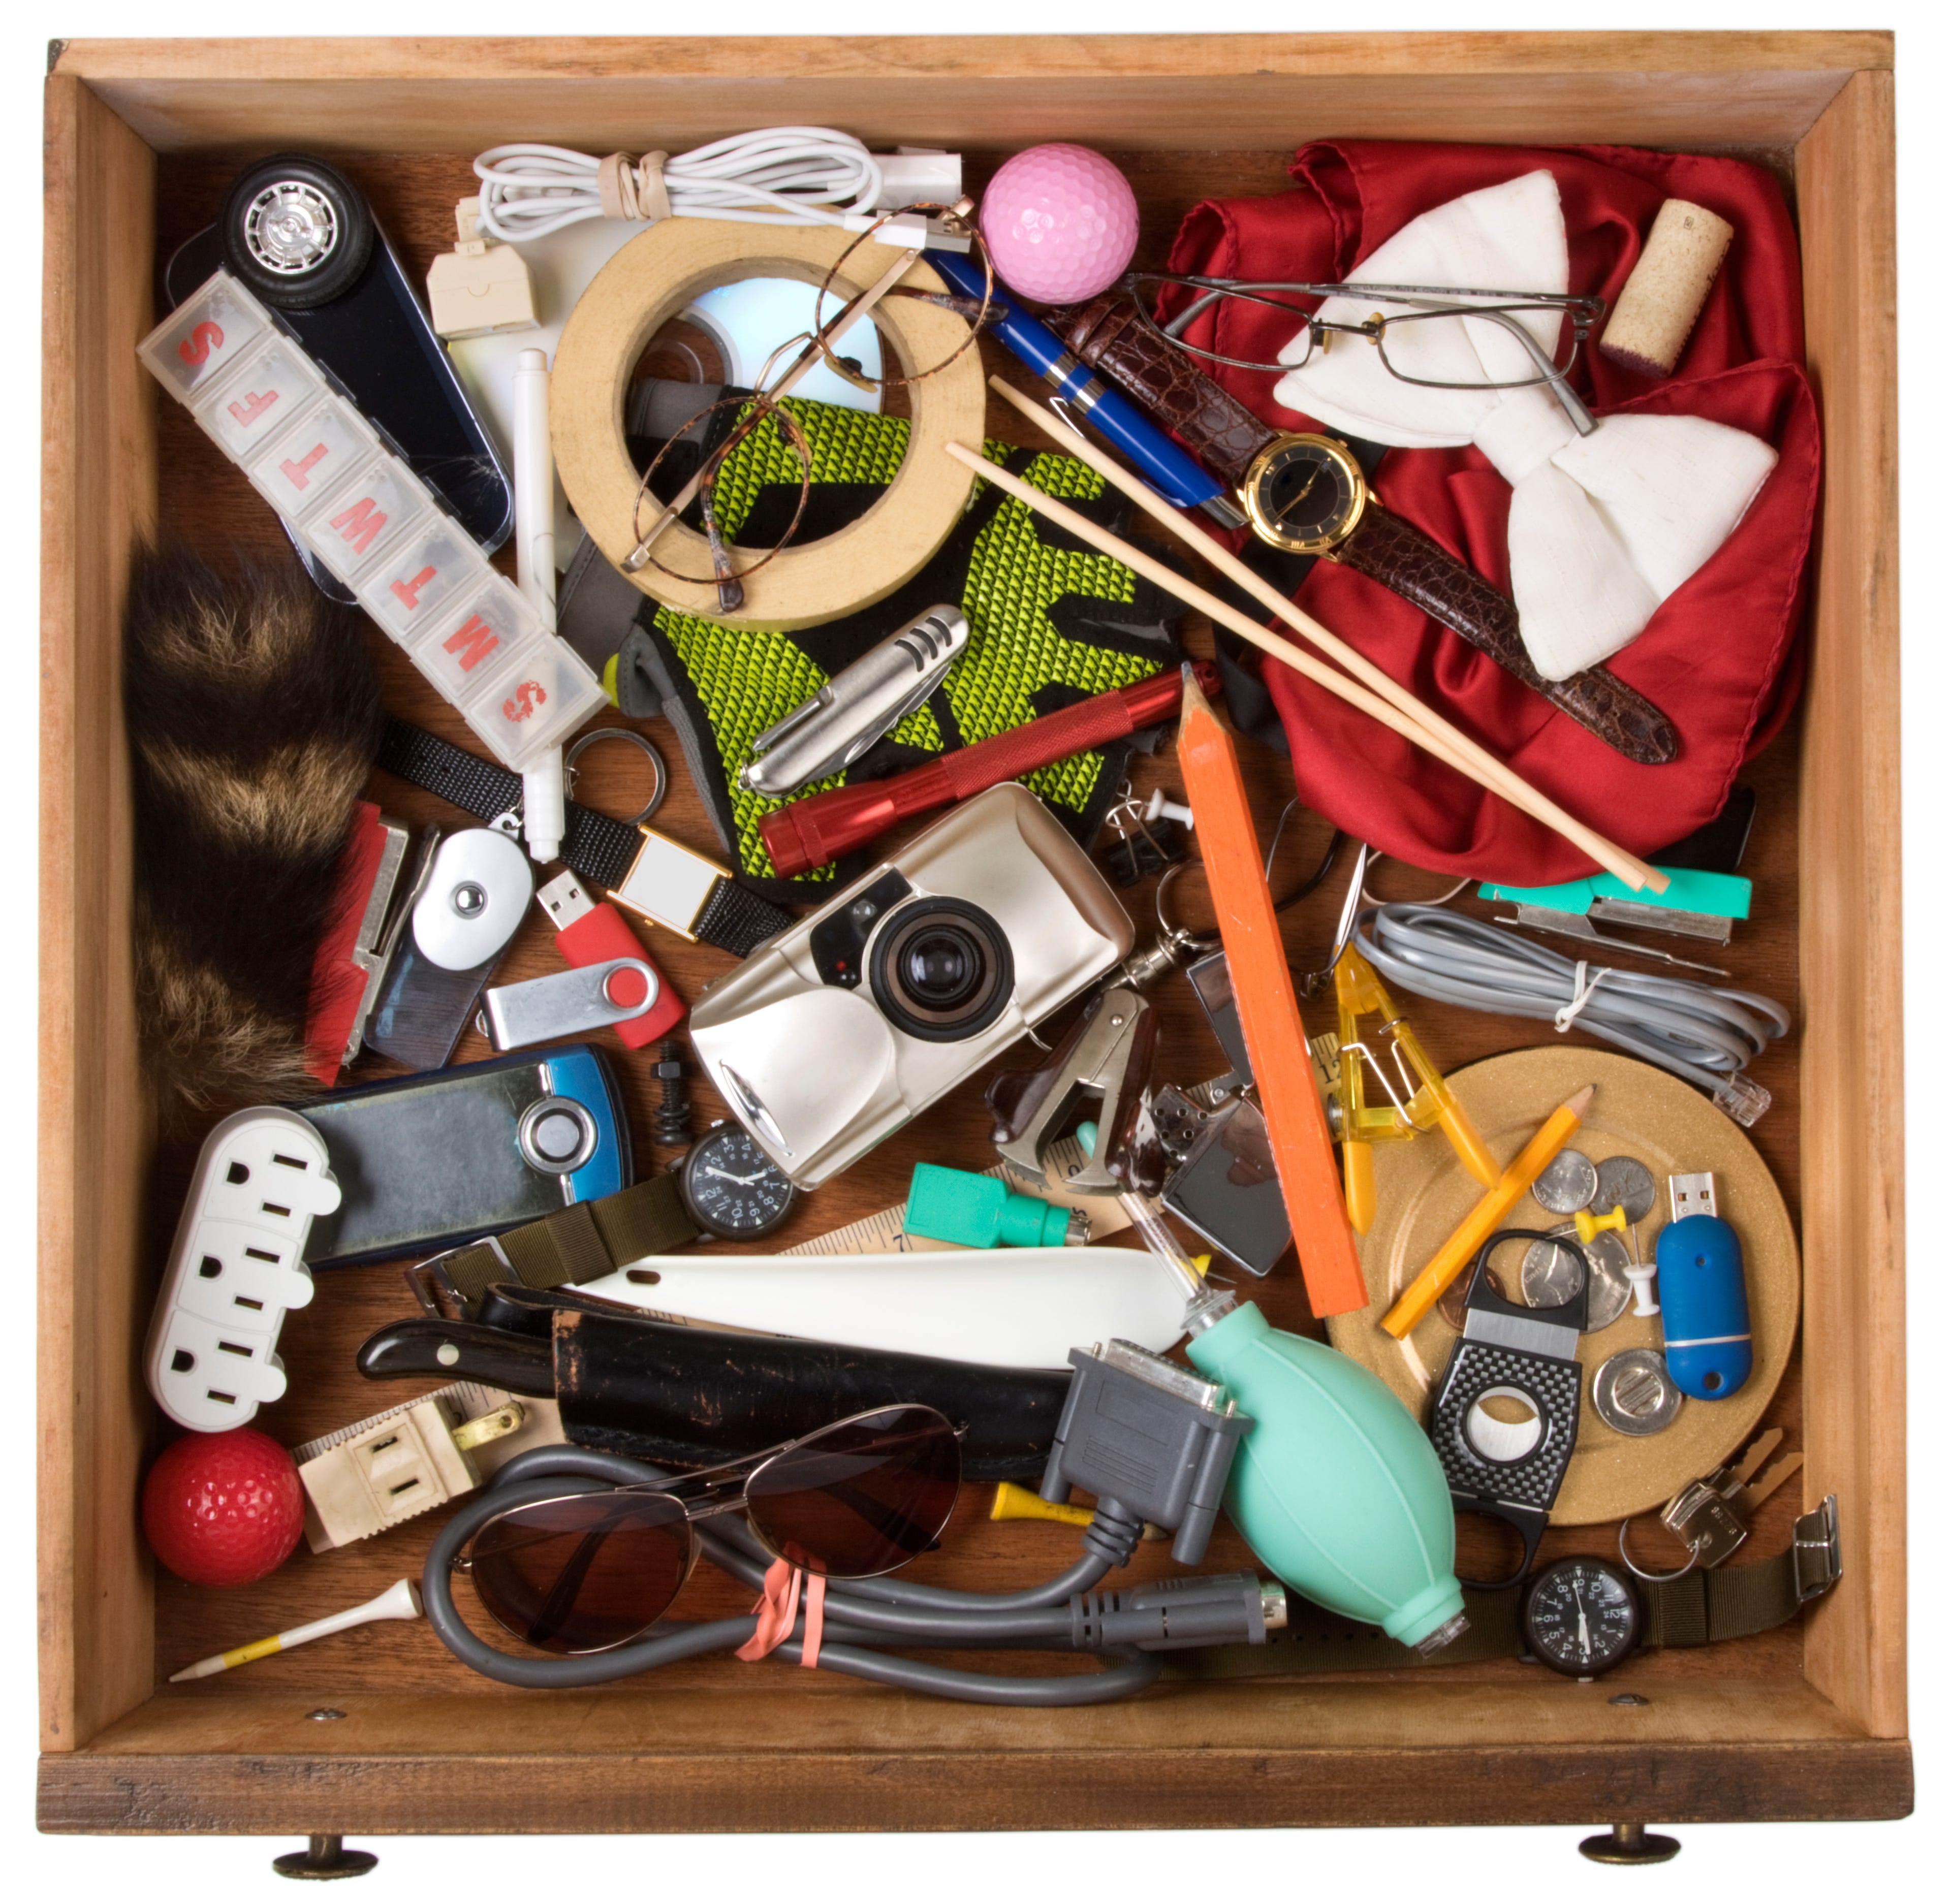 The Junk Drawer, Vol. III by Charlotte Clymer